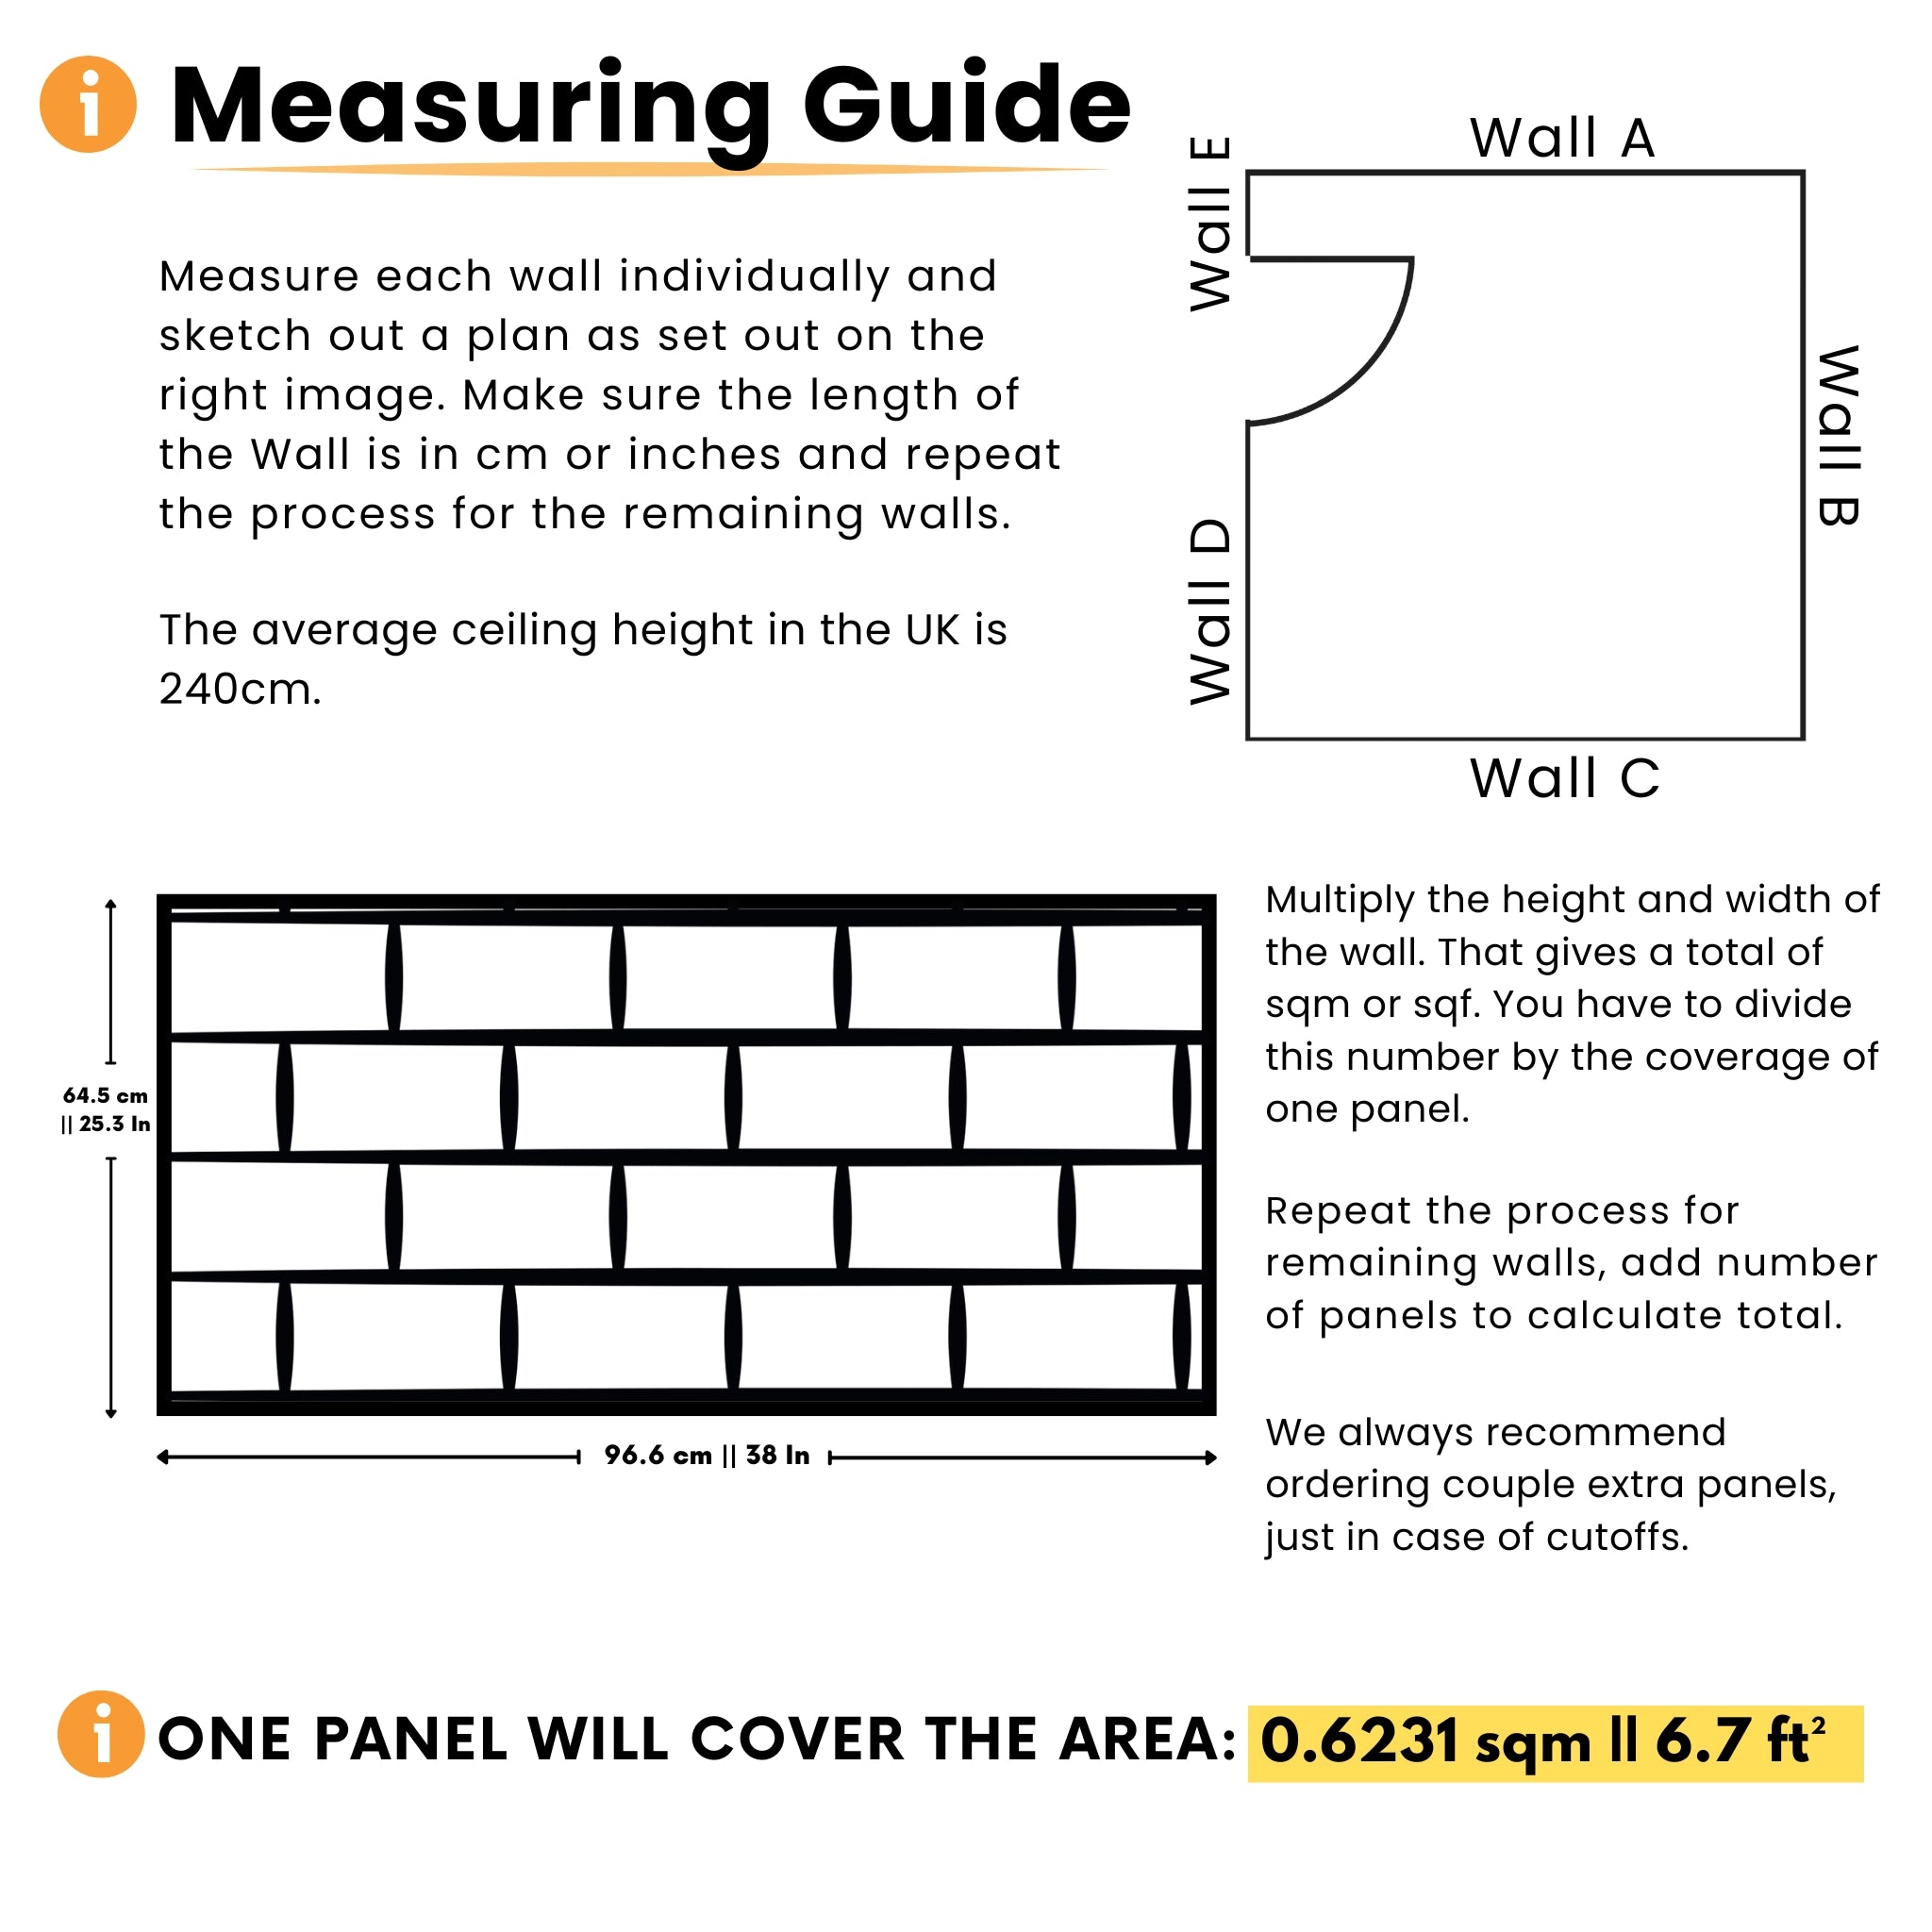 Measuring guide for PVC wall panels, dimensions and coverage area